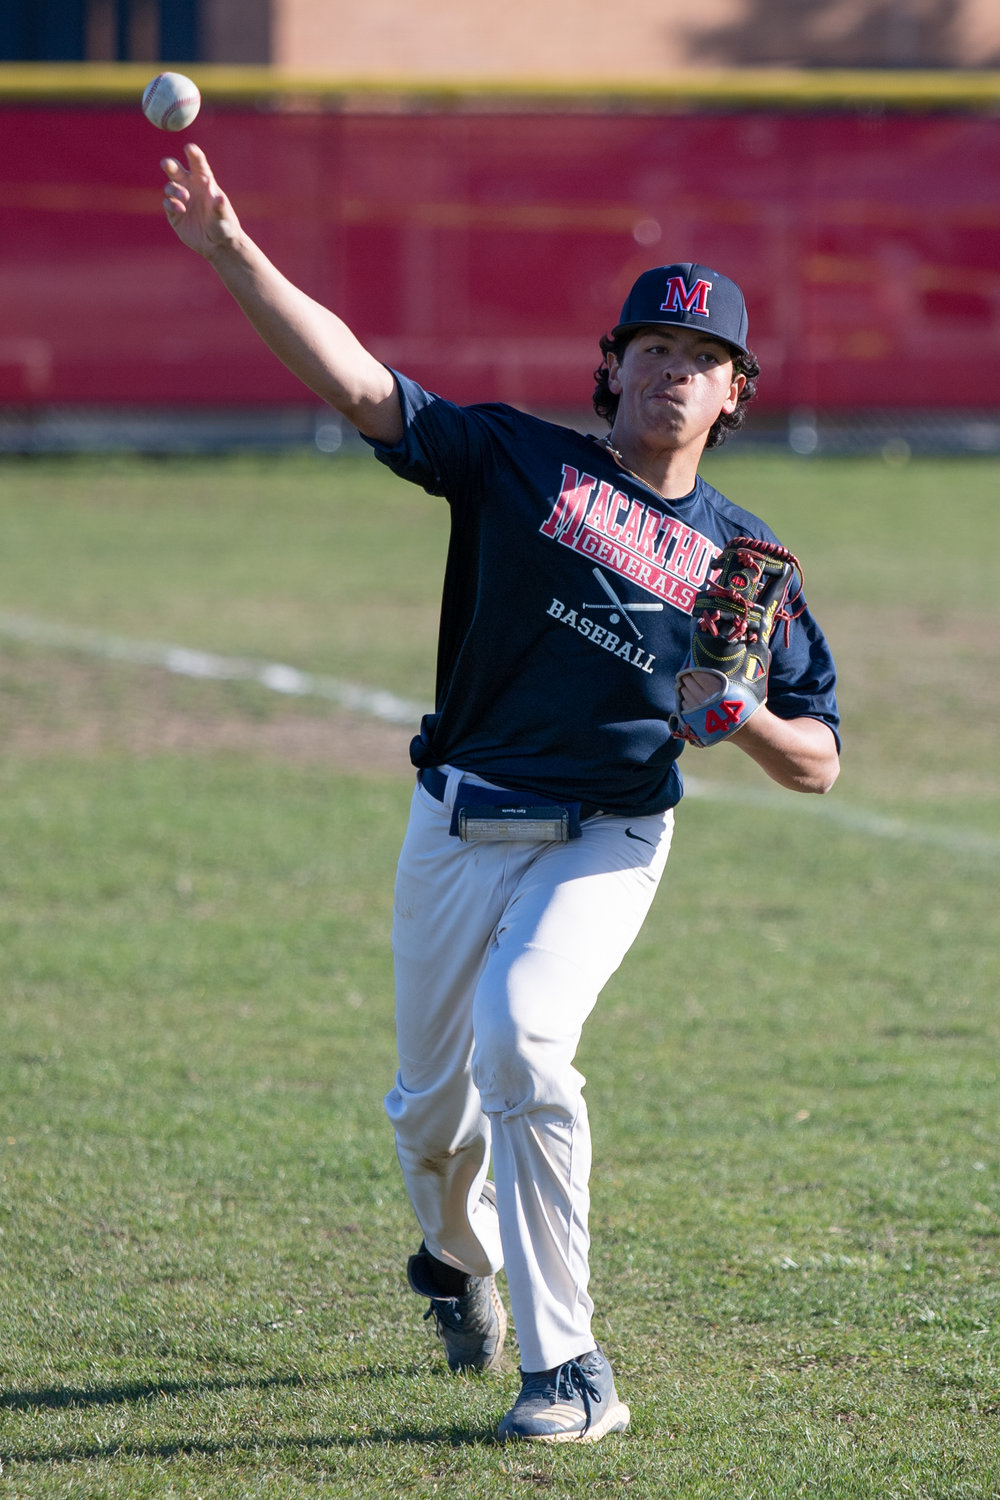 Senior Ryan Castrillon serves as one of the Generals’ starting pitchers and spends two games each week at third base.